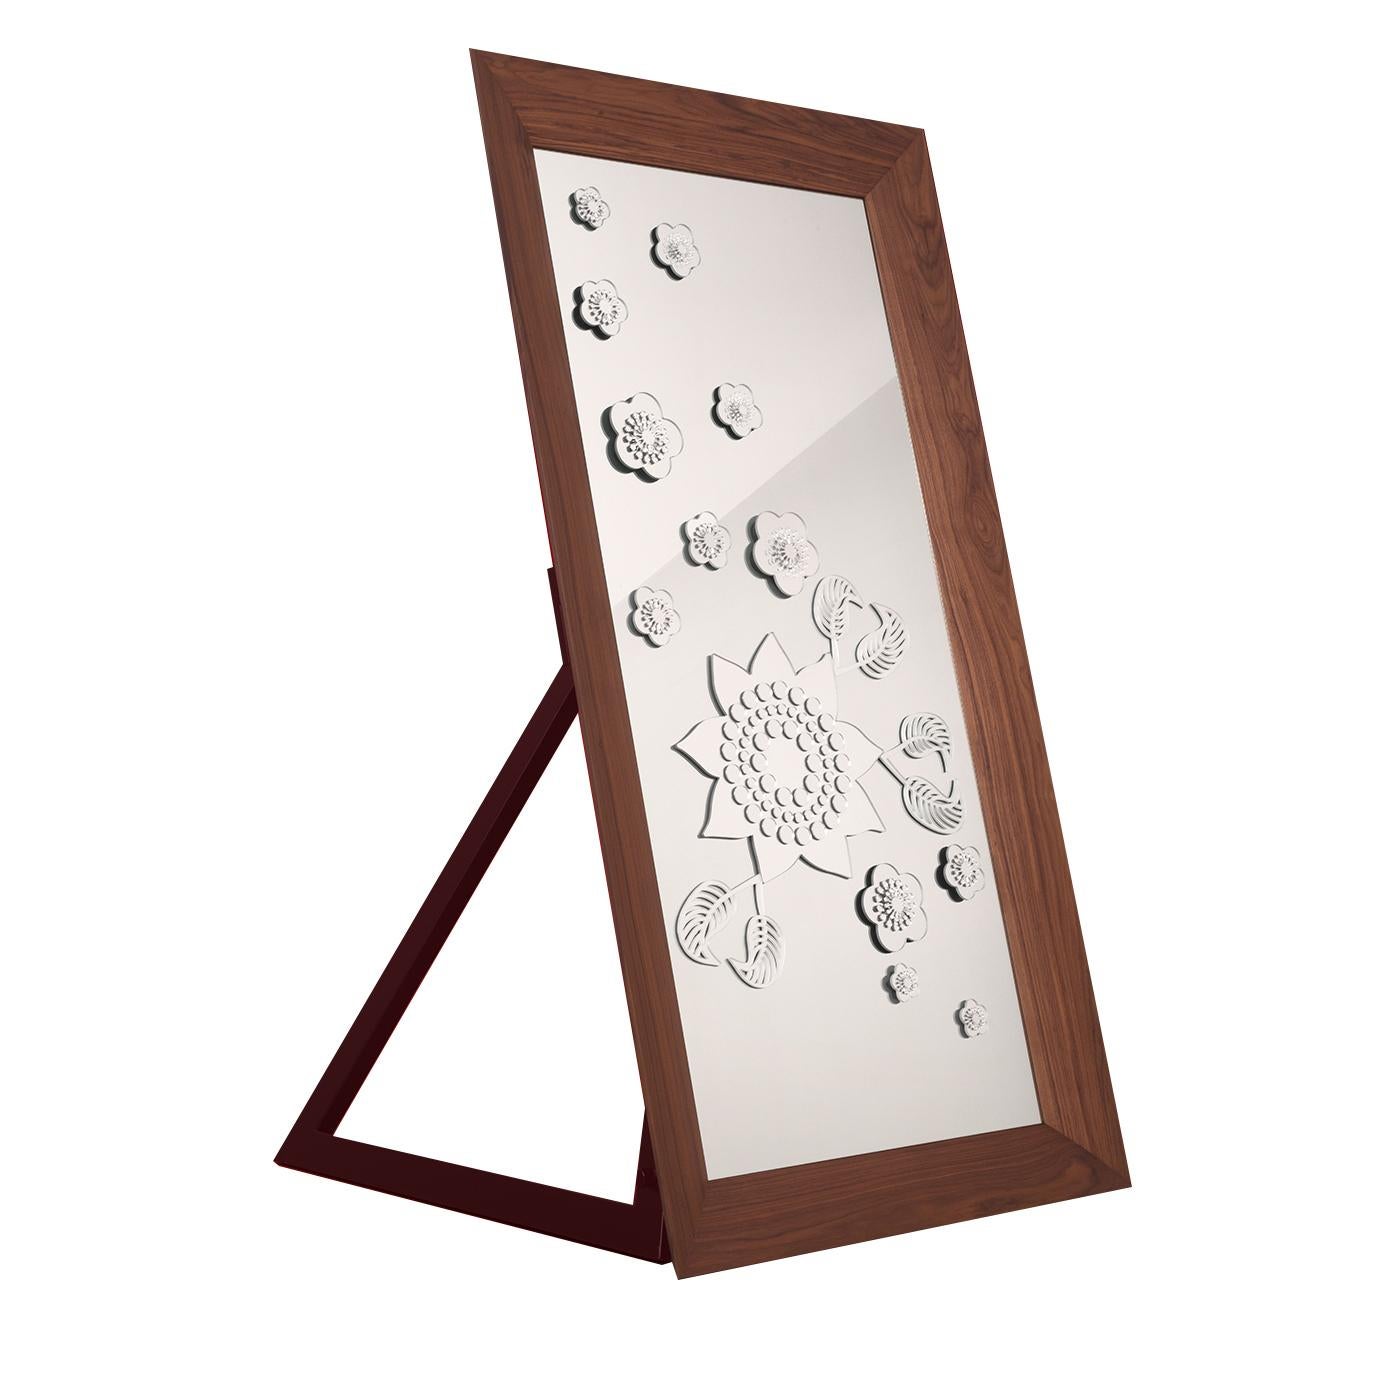 The dramatic simplicity of this mirror comes from the bold, laser-cut, plexiglass flowers and leaves that accent its surface, adding reflections of light and visual appeal. The rectangular frame is made of Canaletto walnut wood frame and can be